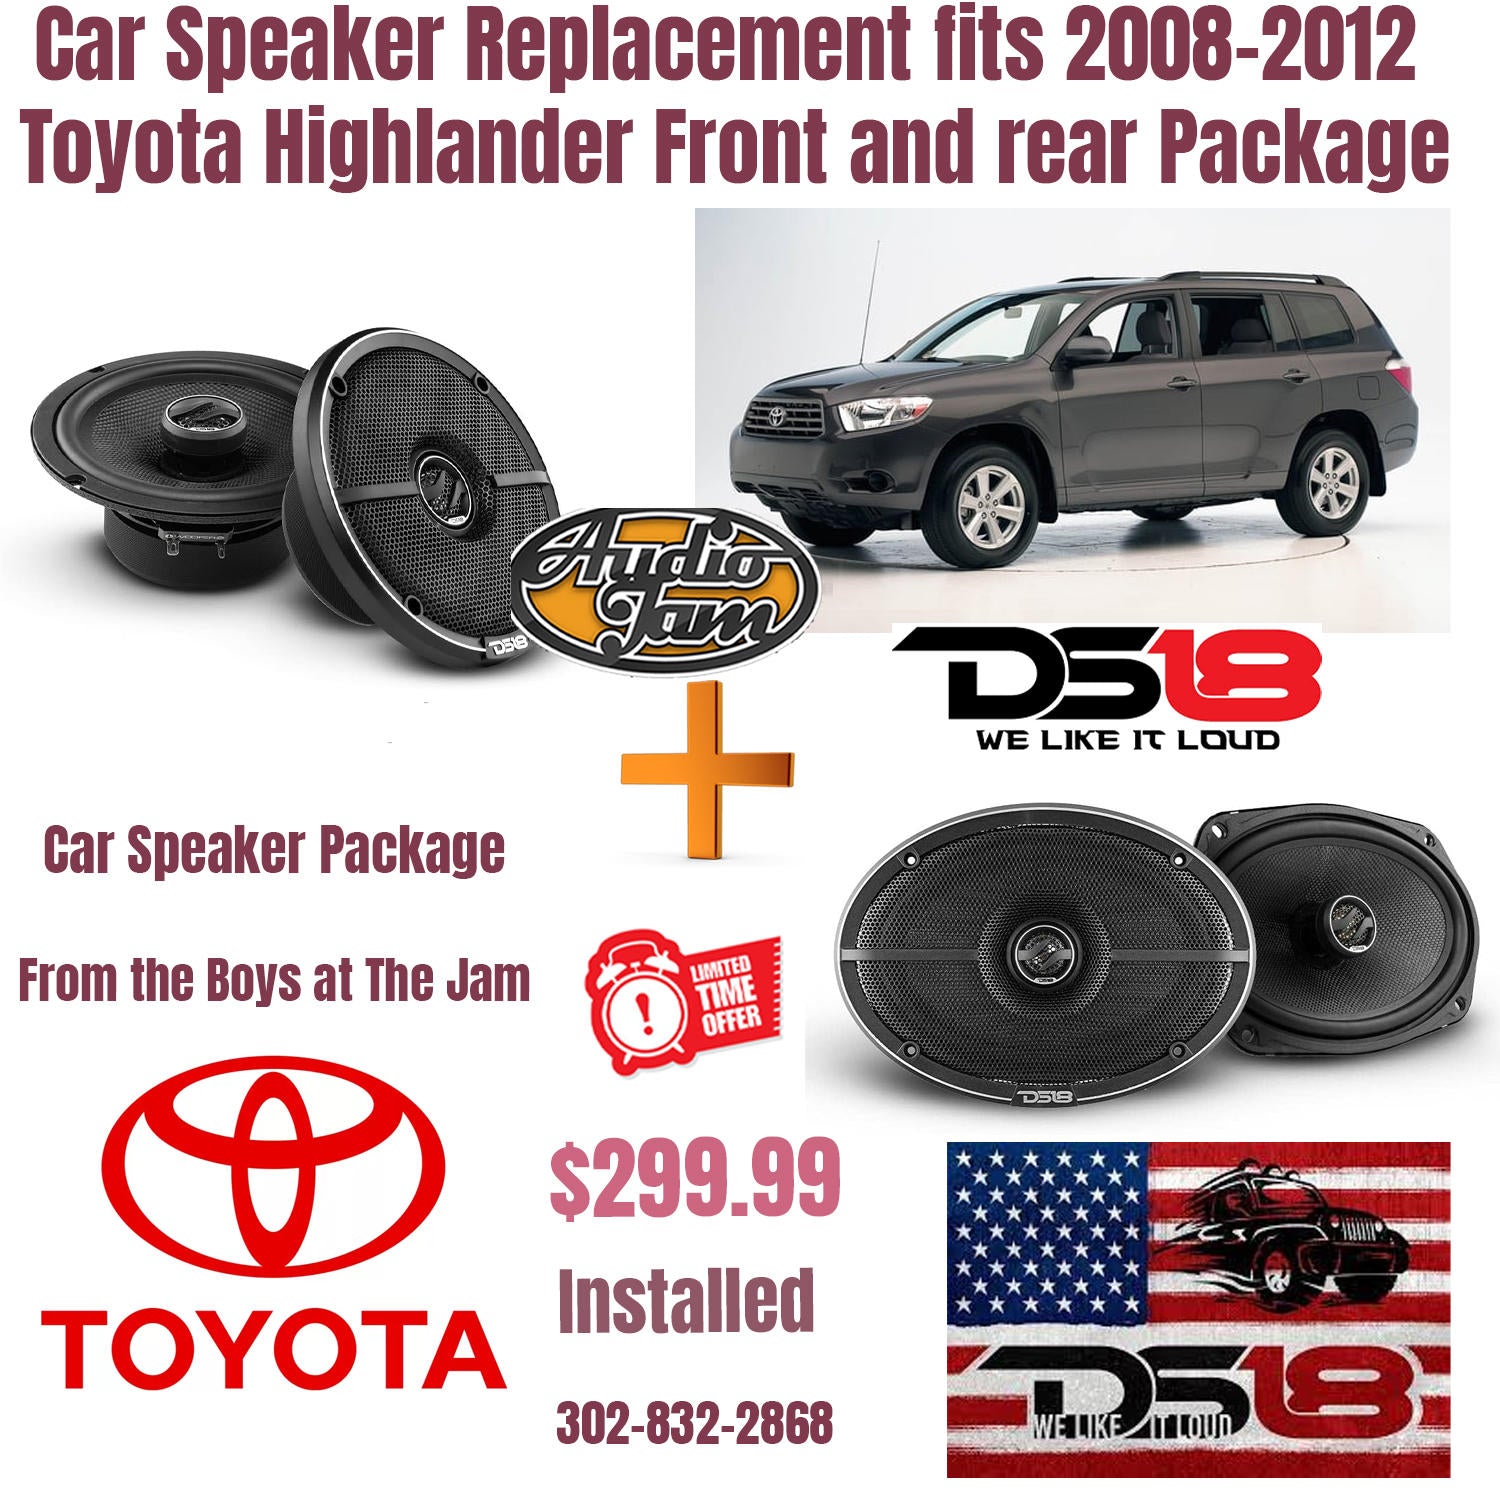 Car Speaker Replacement fits 2008-2012 Toyota Highlander Front and rear Package